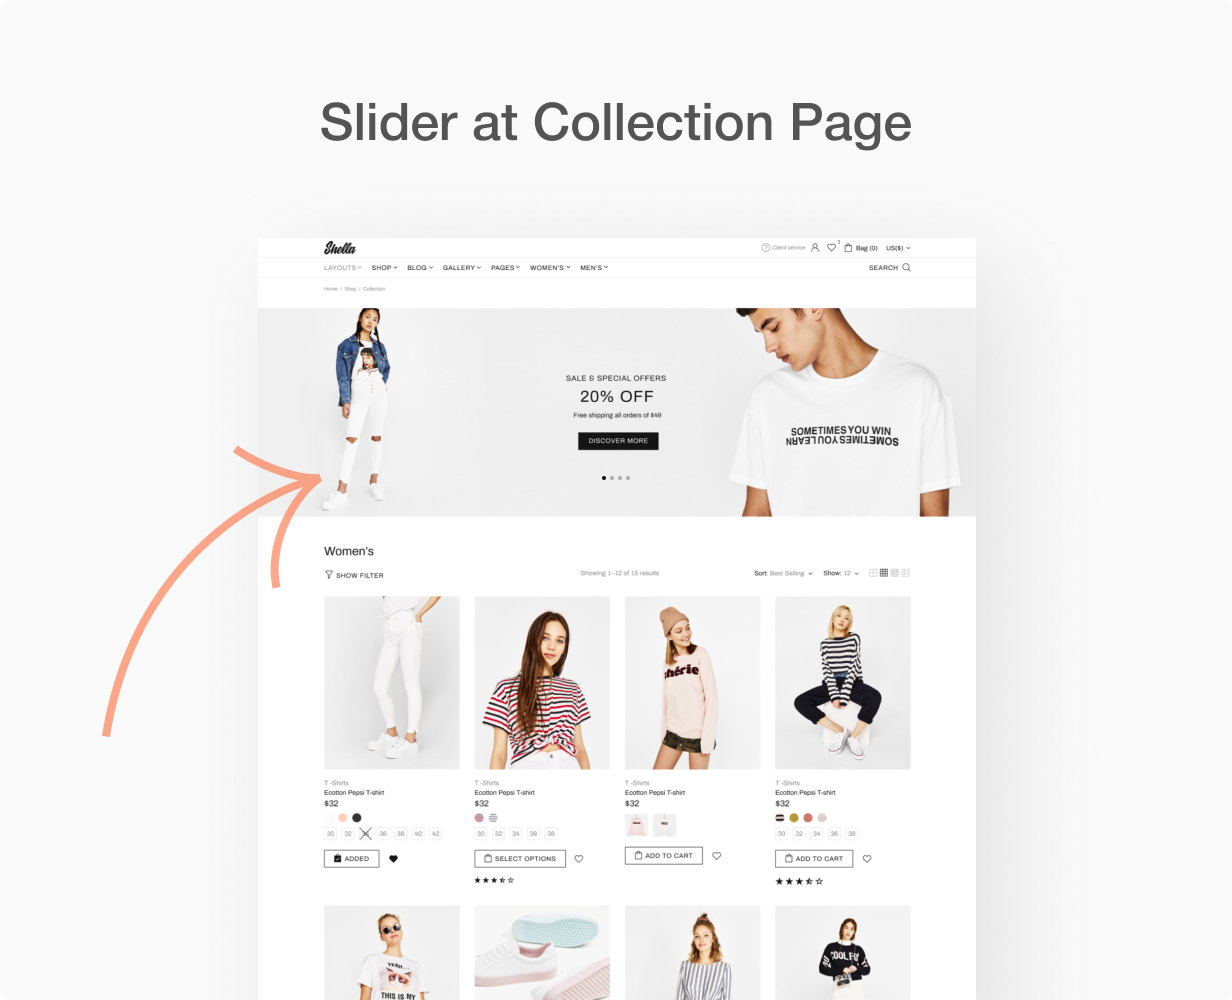 Slider at collection page